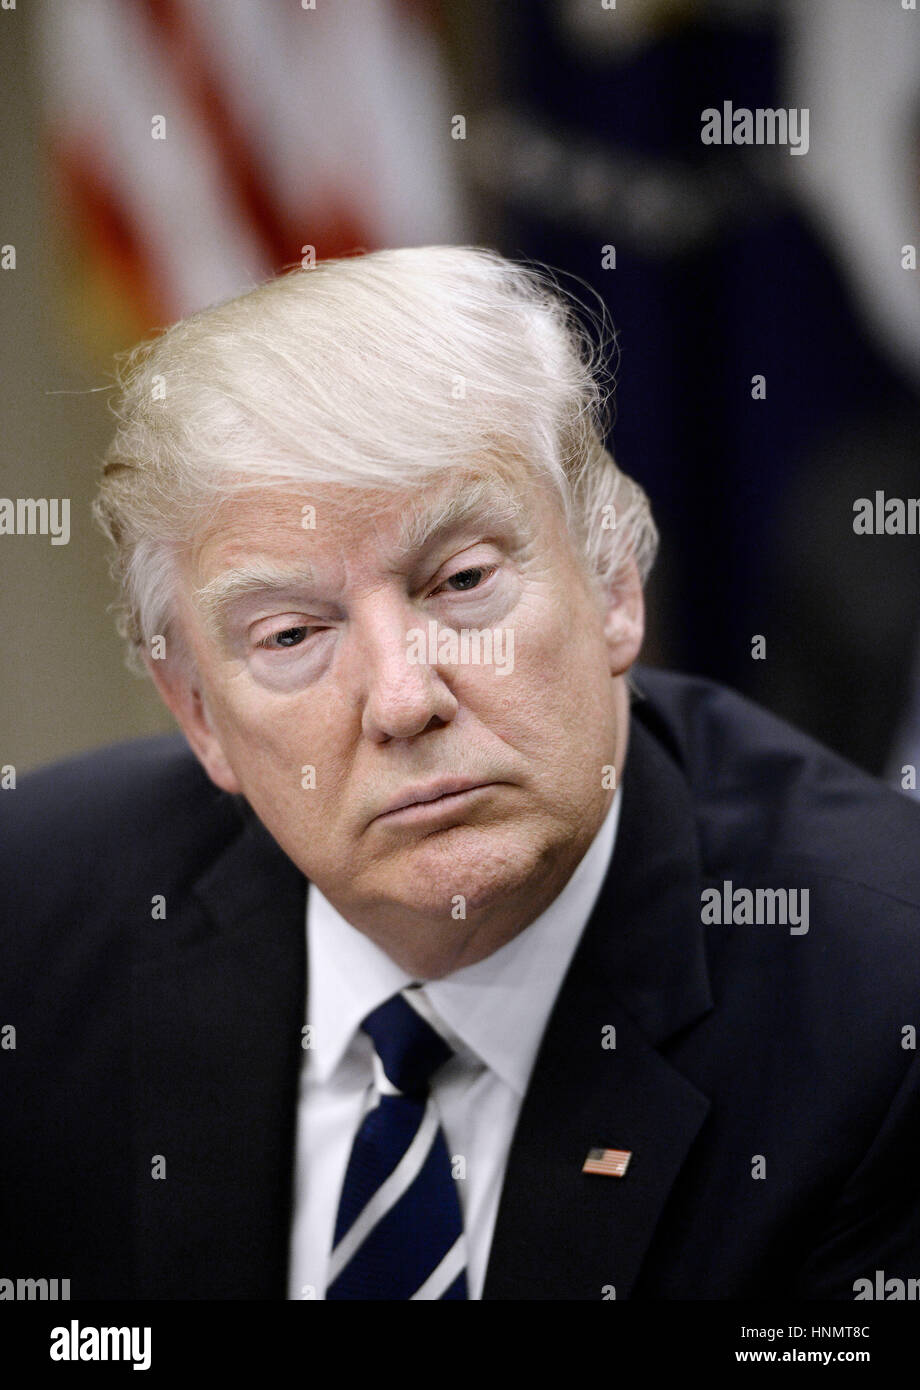 Washington, DC, USA. 14th Feb, 2017. United States President Donald Trump speaks during a parent-teacher conference listening session in the Roosevelt Room of the White House on February 14, 2017 in Washington, DC. Credit: MediaPunch Inc/Alamy Live News Stock Photo